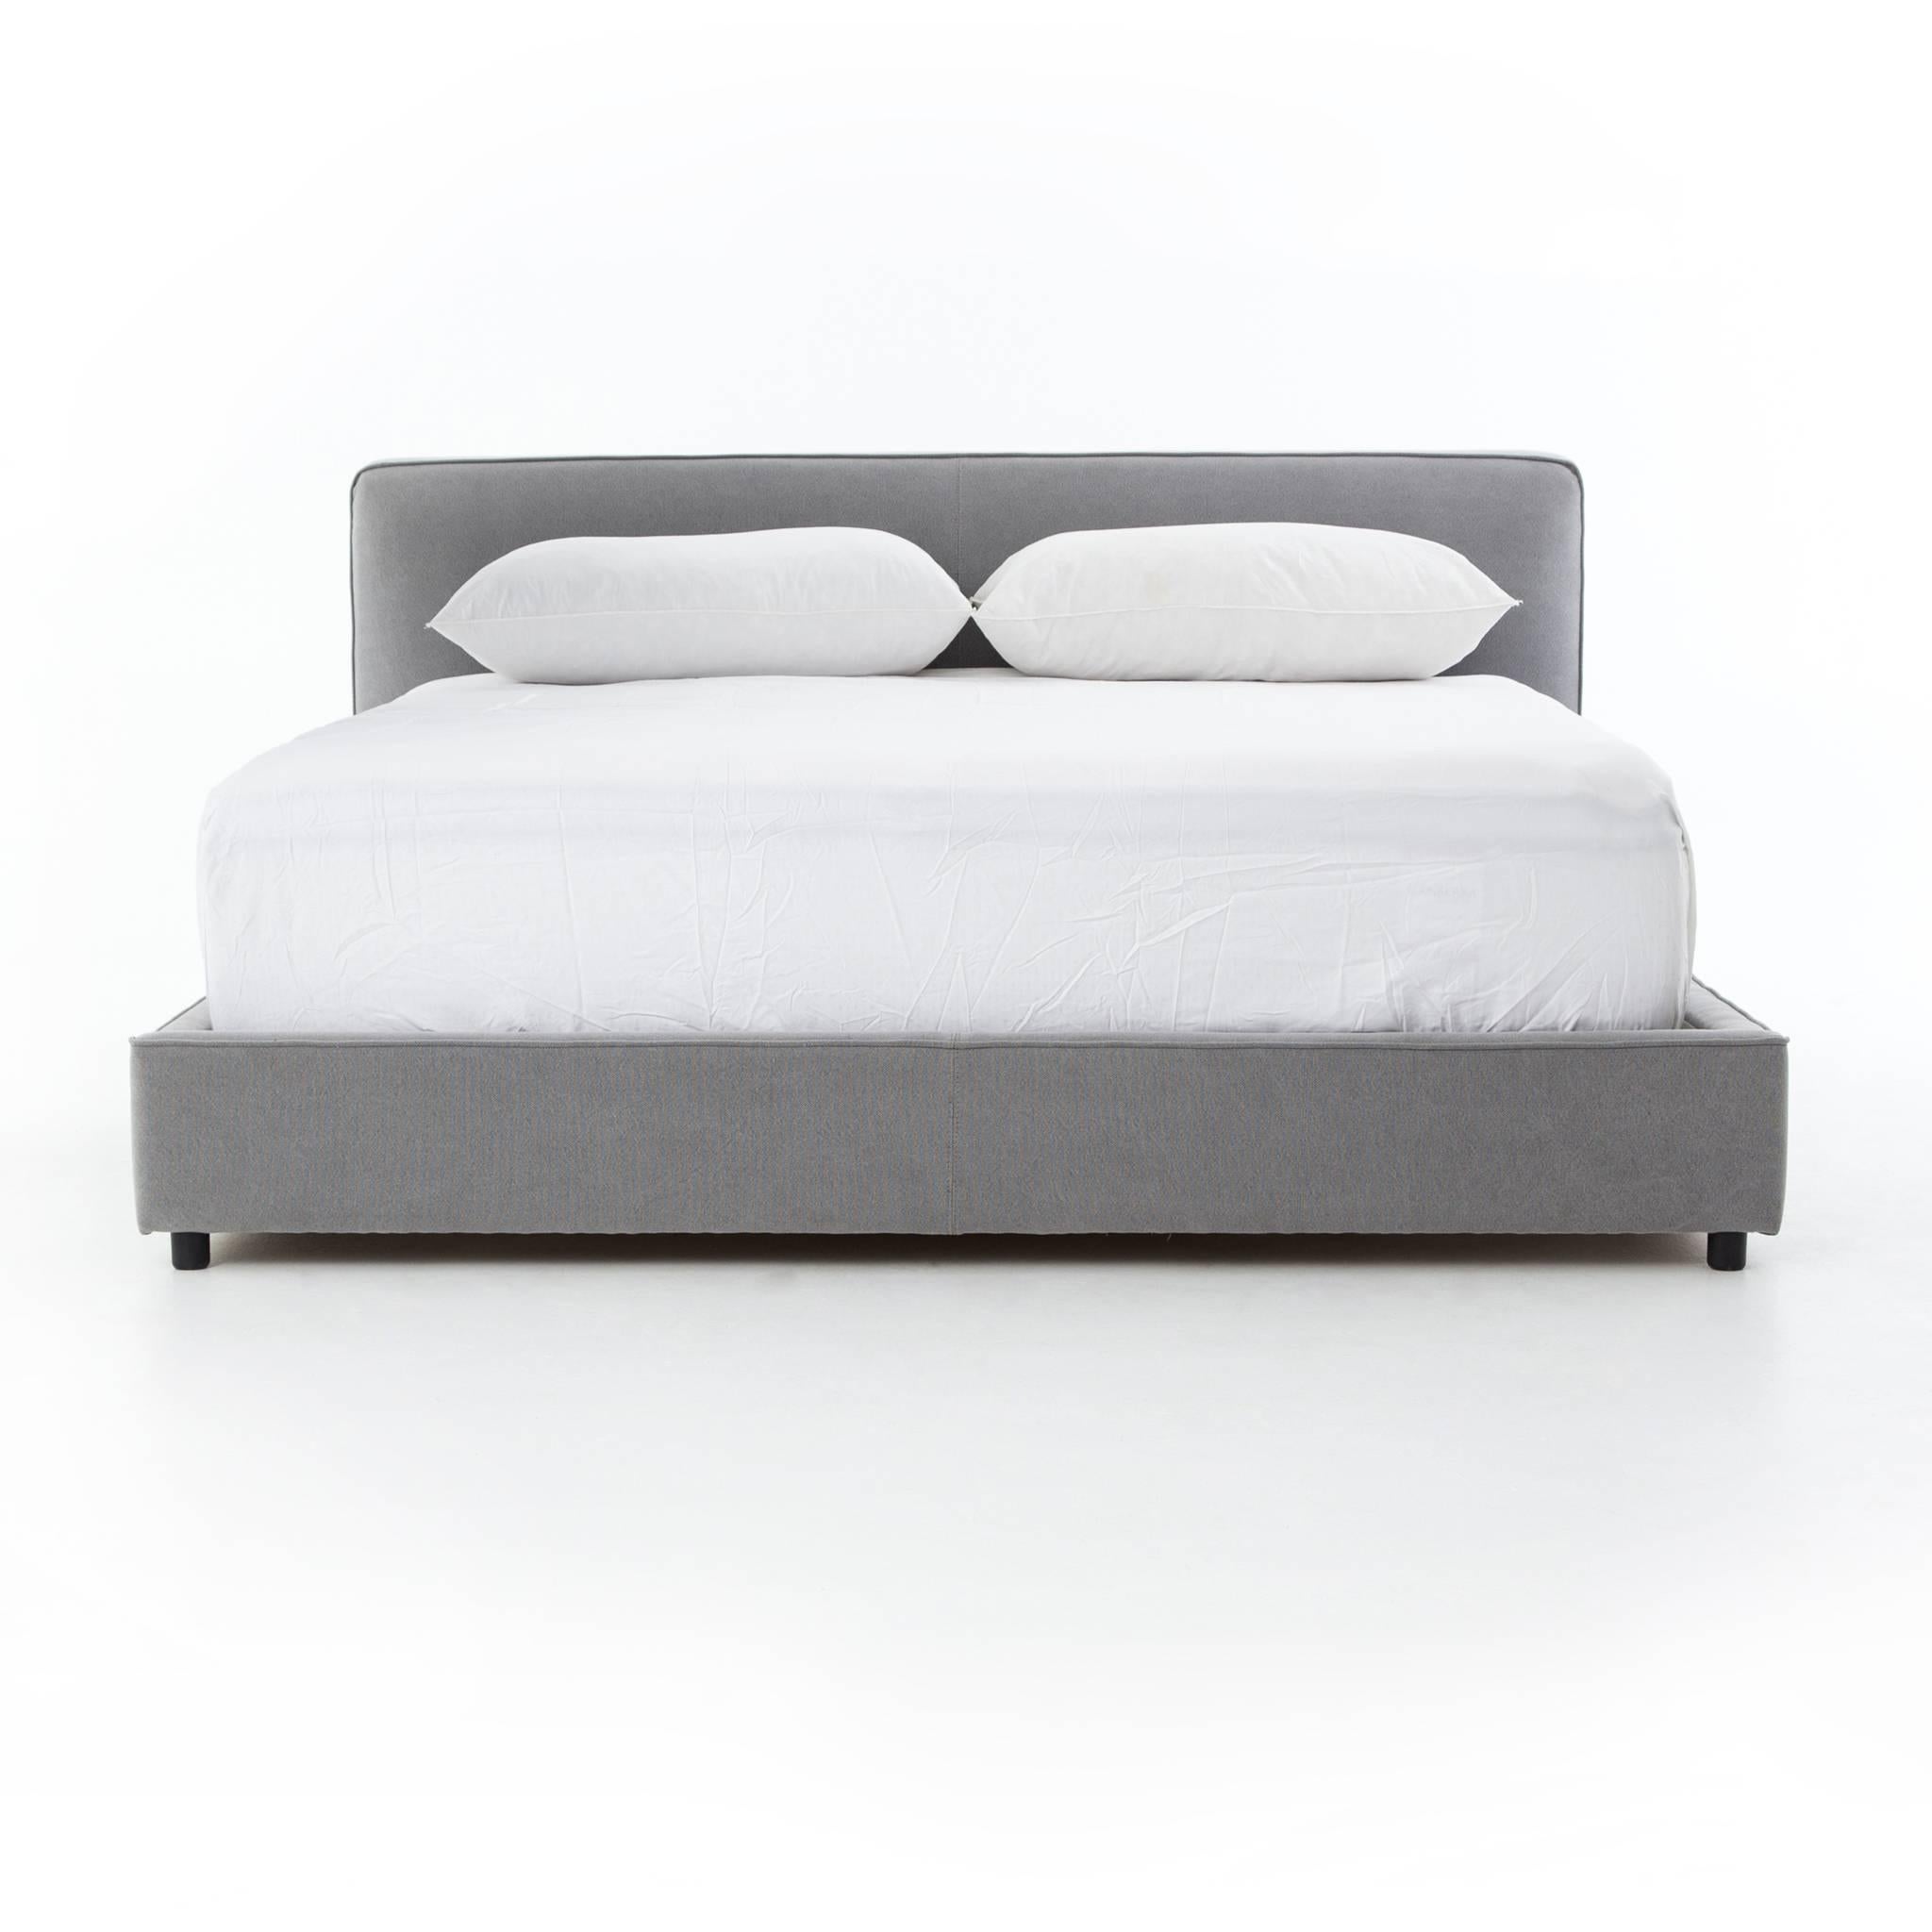 Upholstered bed in King and Queen low profile luxury. Modern Italian styling is both substantial and plush, with clean lines that make a dramatically comfortable statement.
Can be used with or without a box spring.
King $1750.00. Measures: 82.75 W